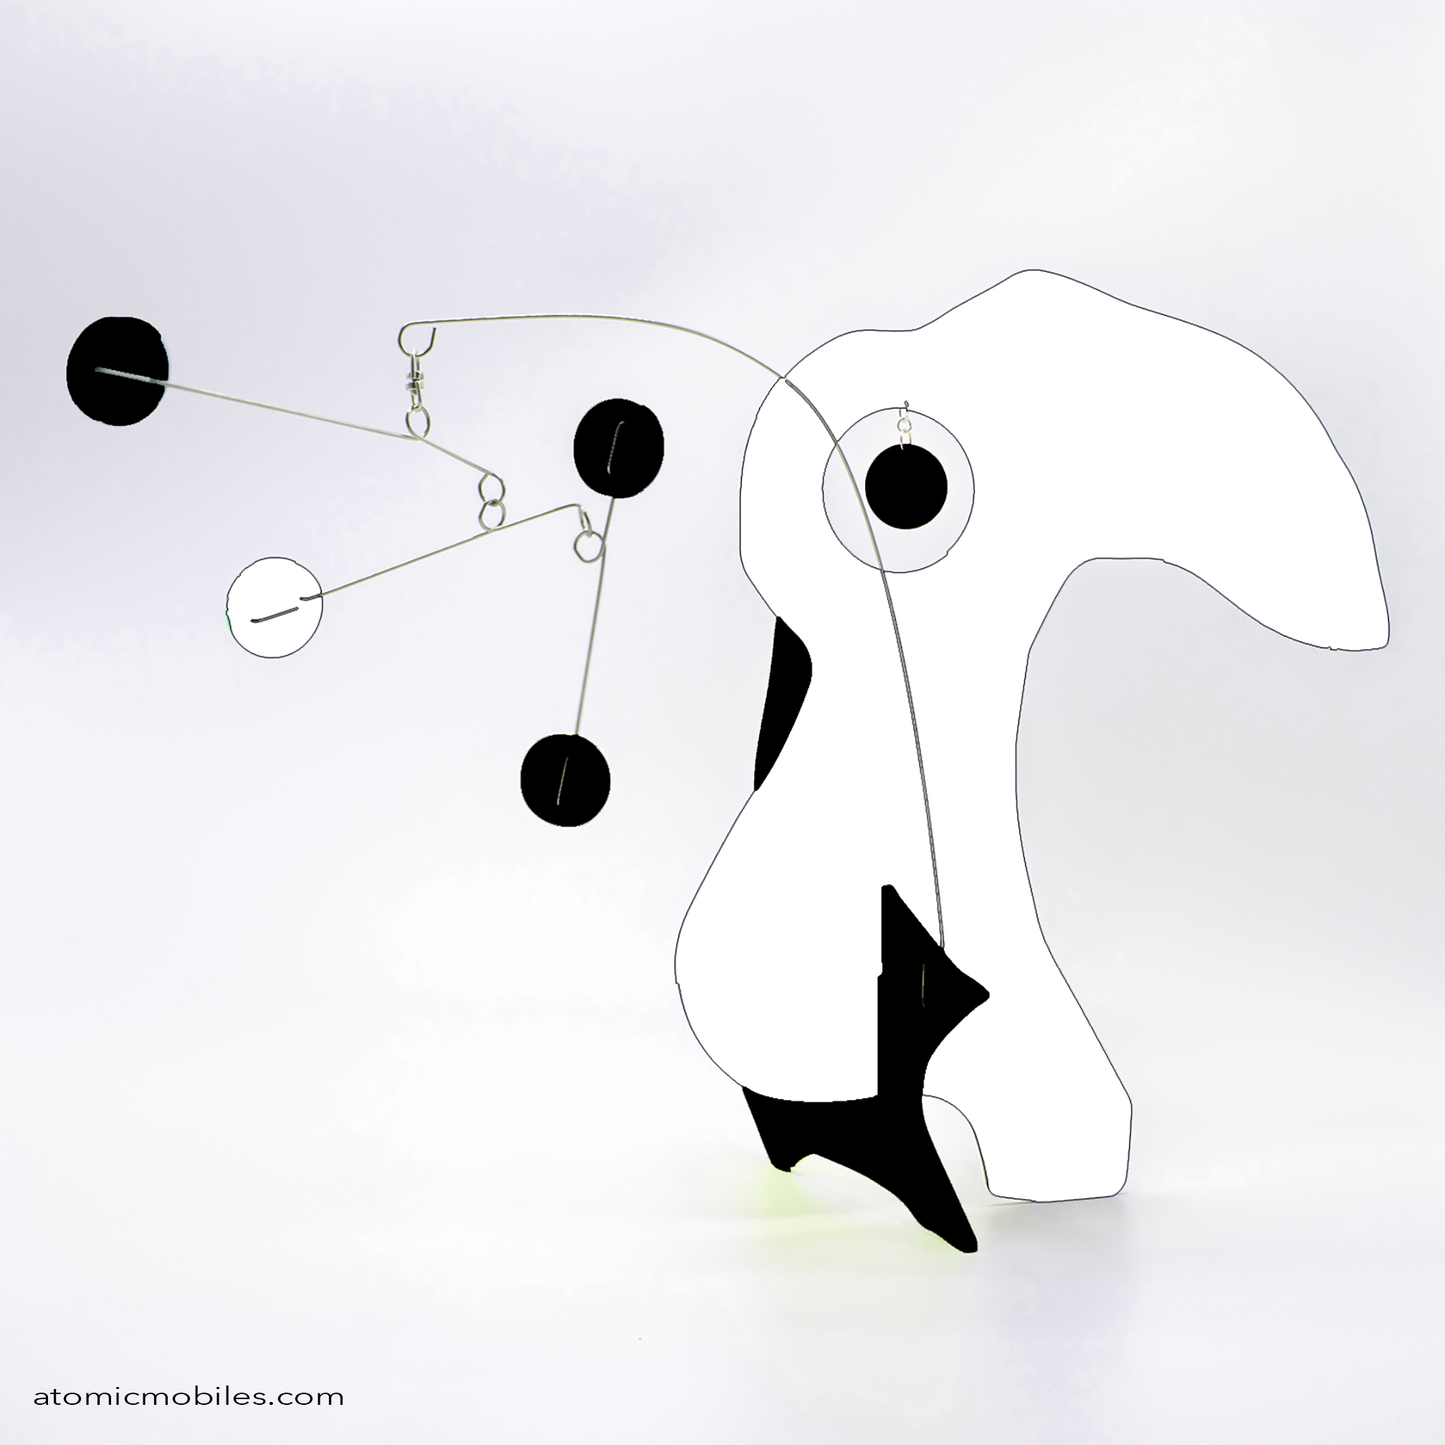 KinetiCats Collection Bird in White and Black - one of 12 Modern Cute Abstract Animal Art Sculpture Kinetic Stabiles inspired by Dada and mid century modern style art by AtomicMobiles.com